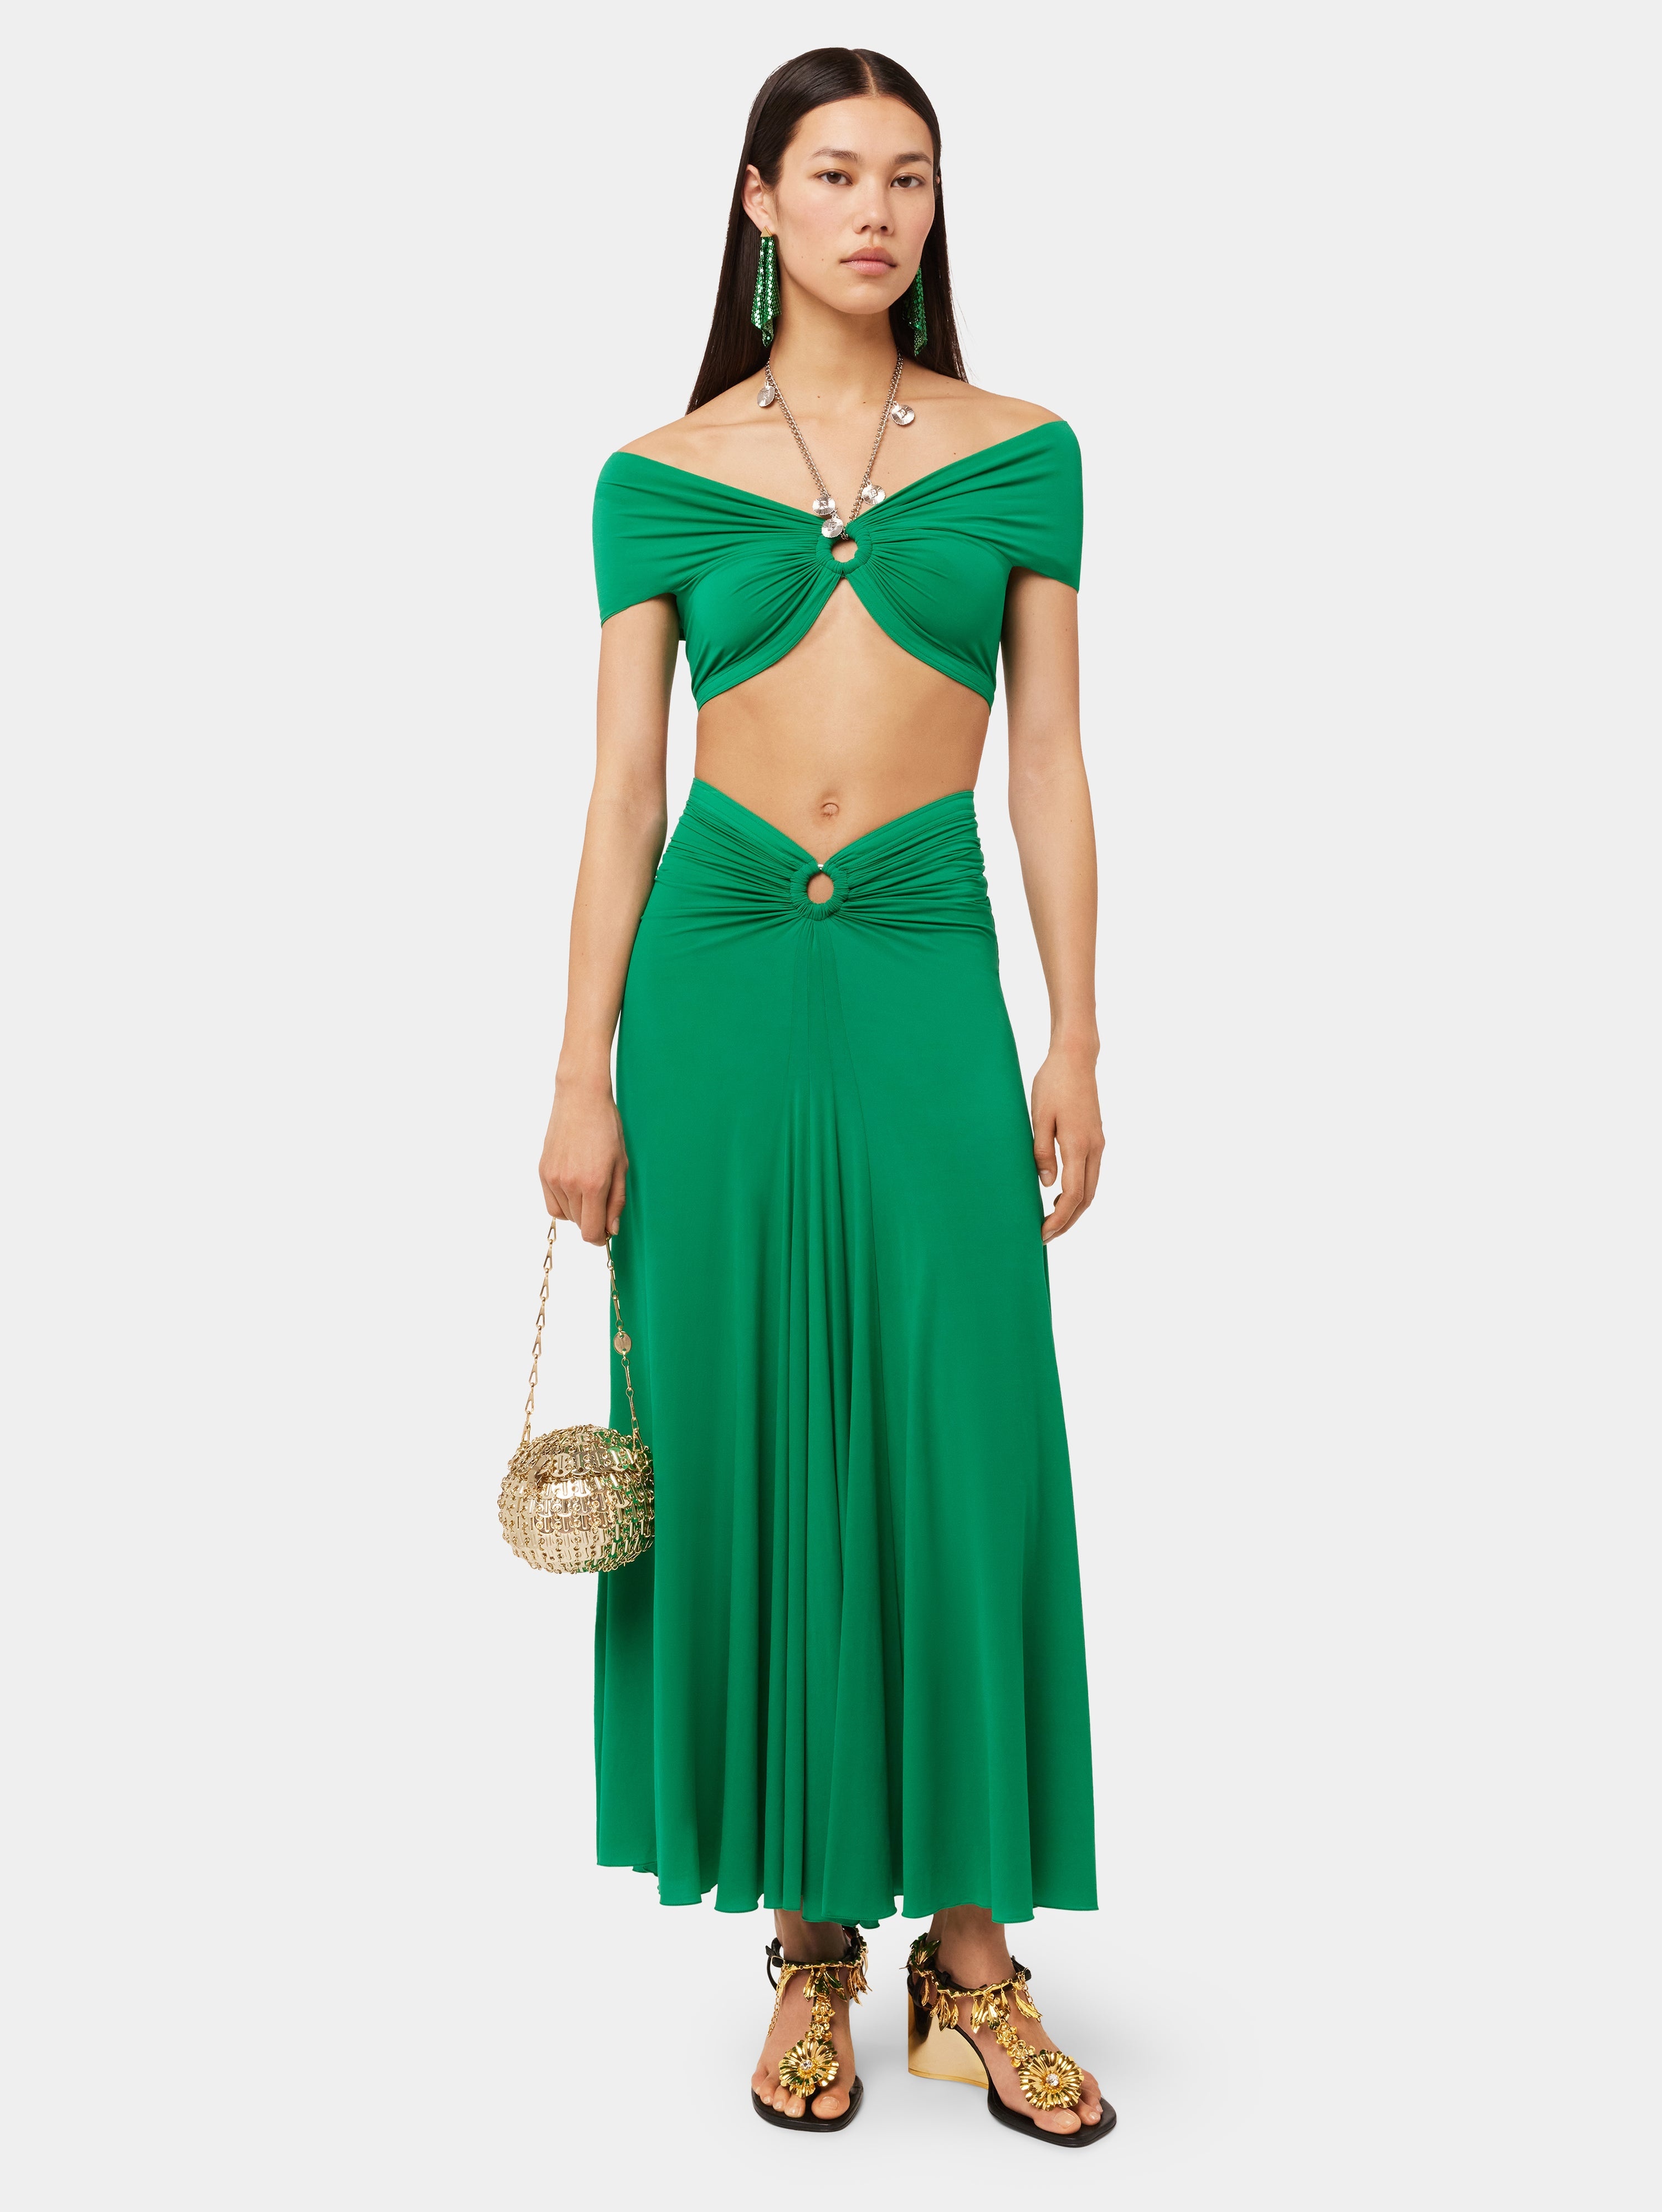 GREEN FLARED DRAPED SKIRT IN JERSEY - 2